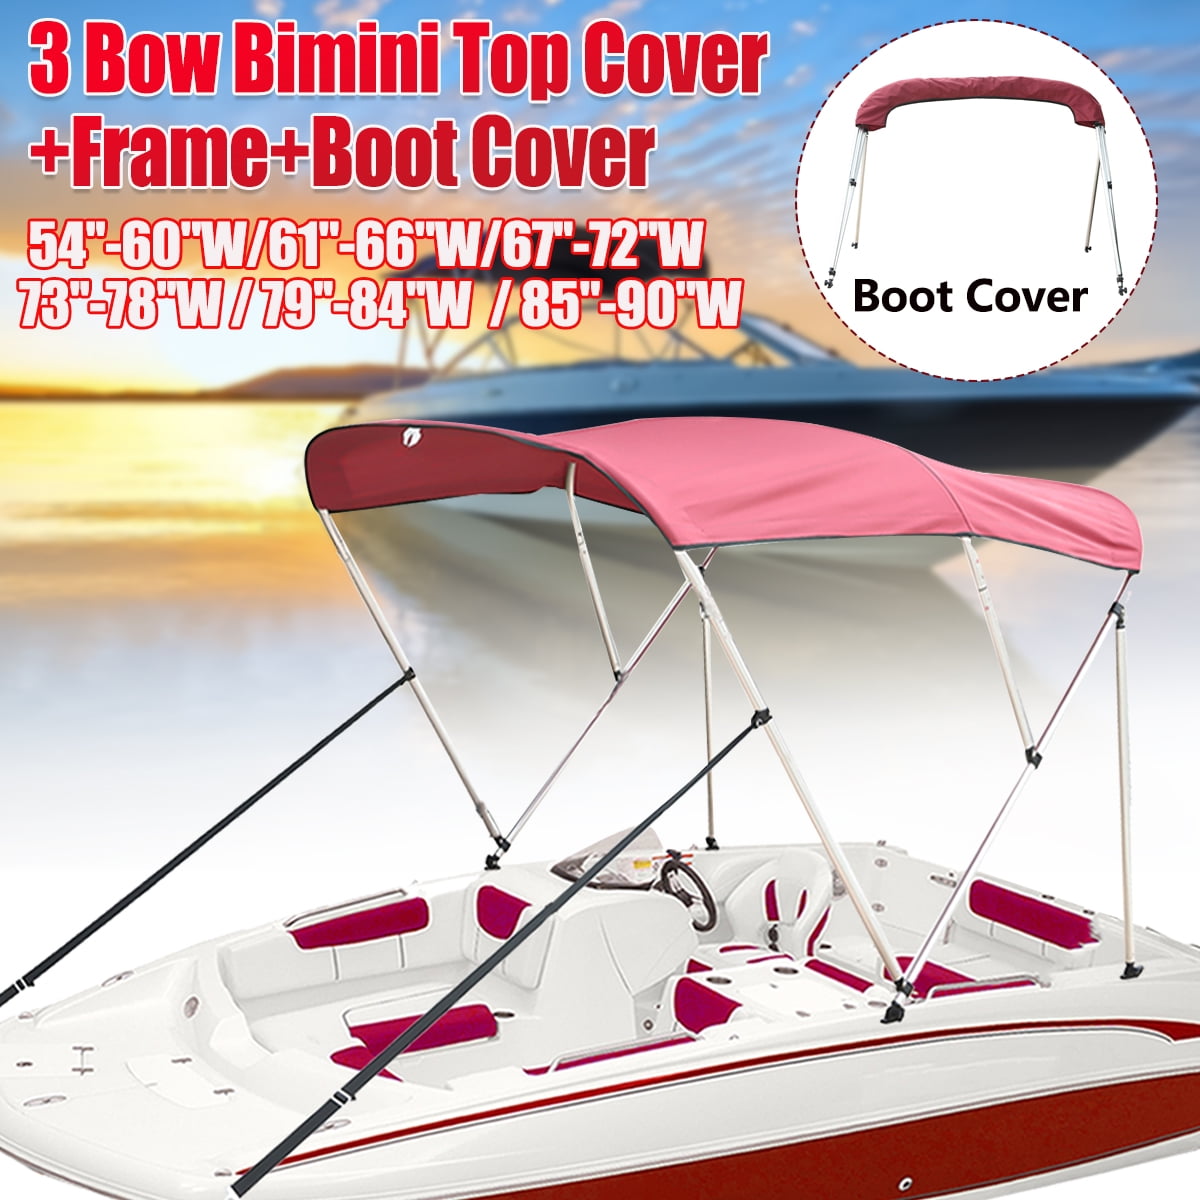 3 Bow Boat Bimini Top Cover Boat Canopy Shade with Support Pole Boot Beige 67-72 